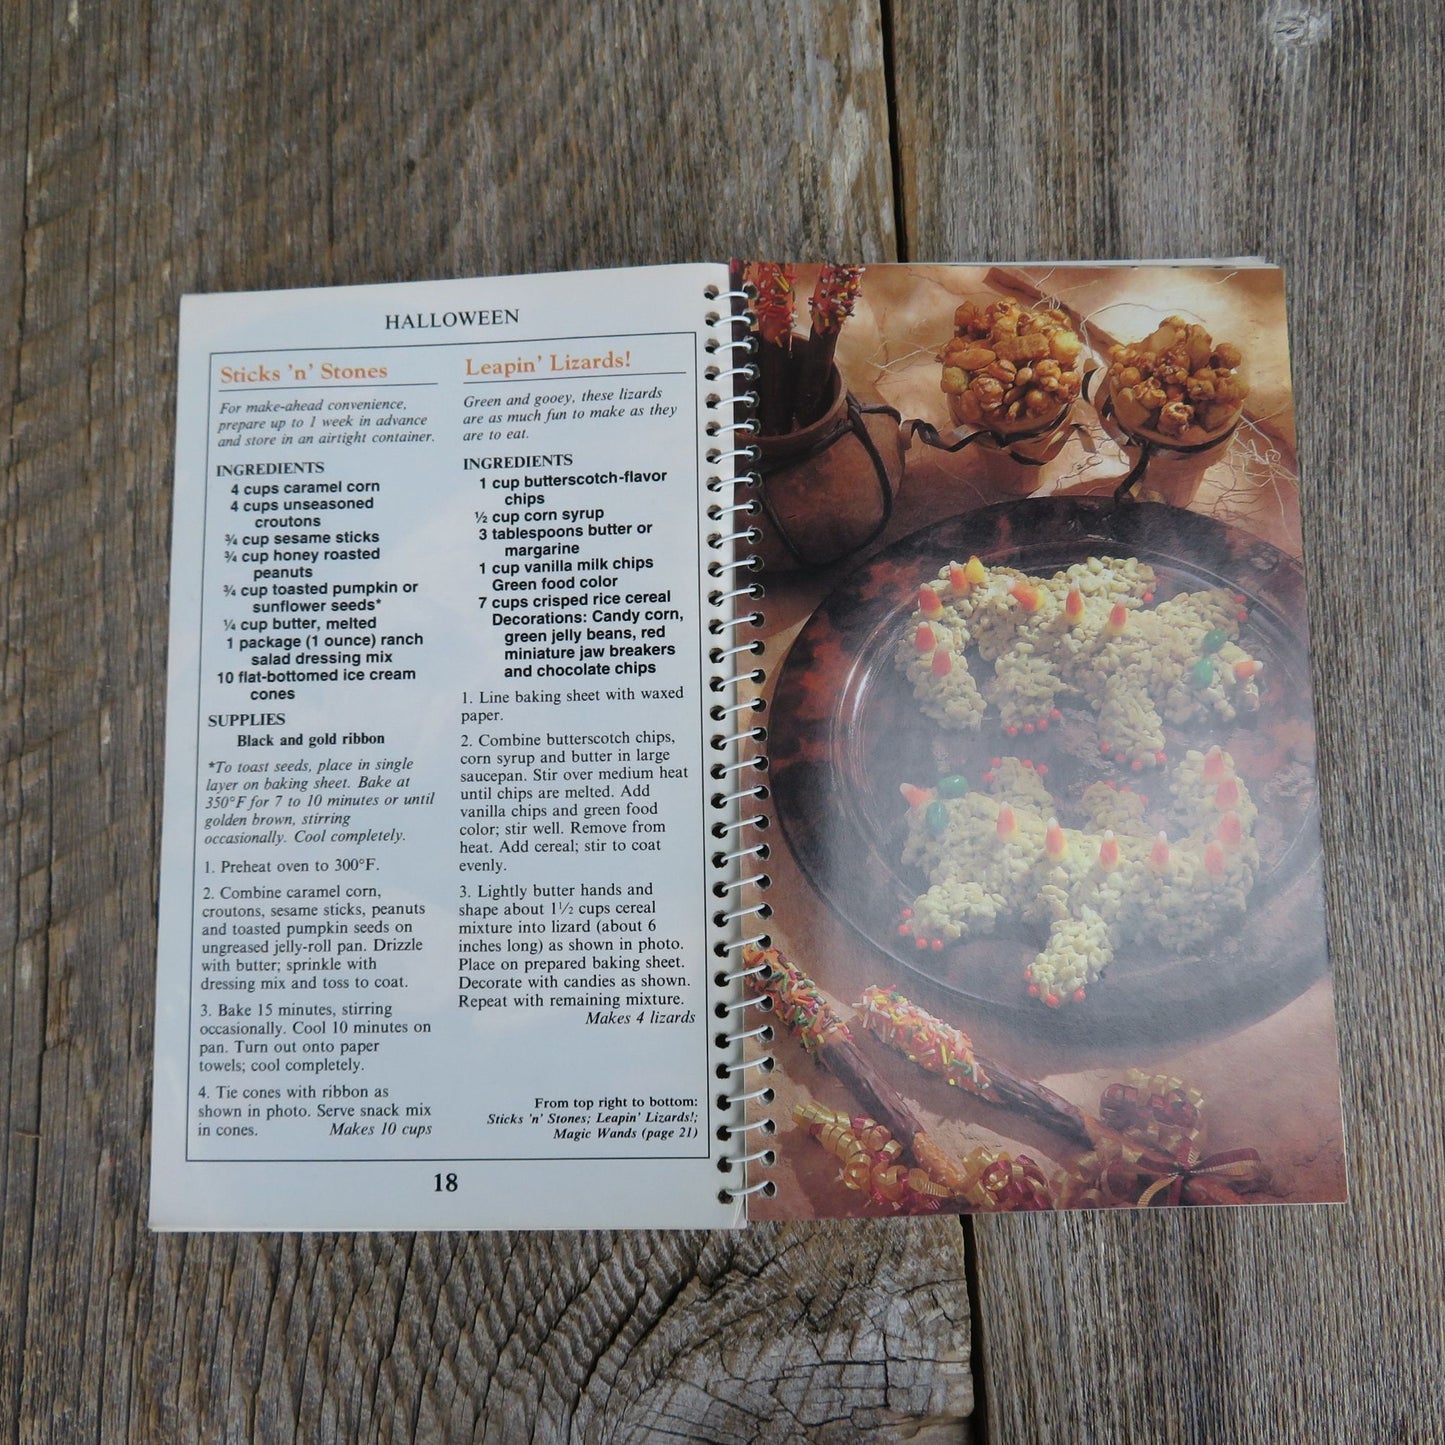 Favorite All Time Recipes Holiday Foods Cookbook Pamphlet 1995 Halloween Thanksgiving Christmas Booklet